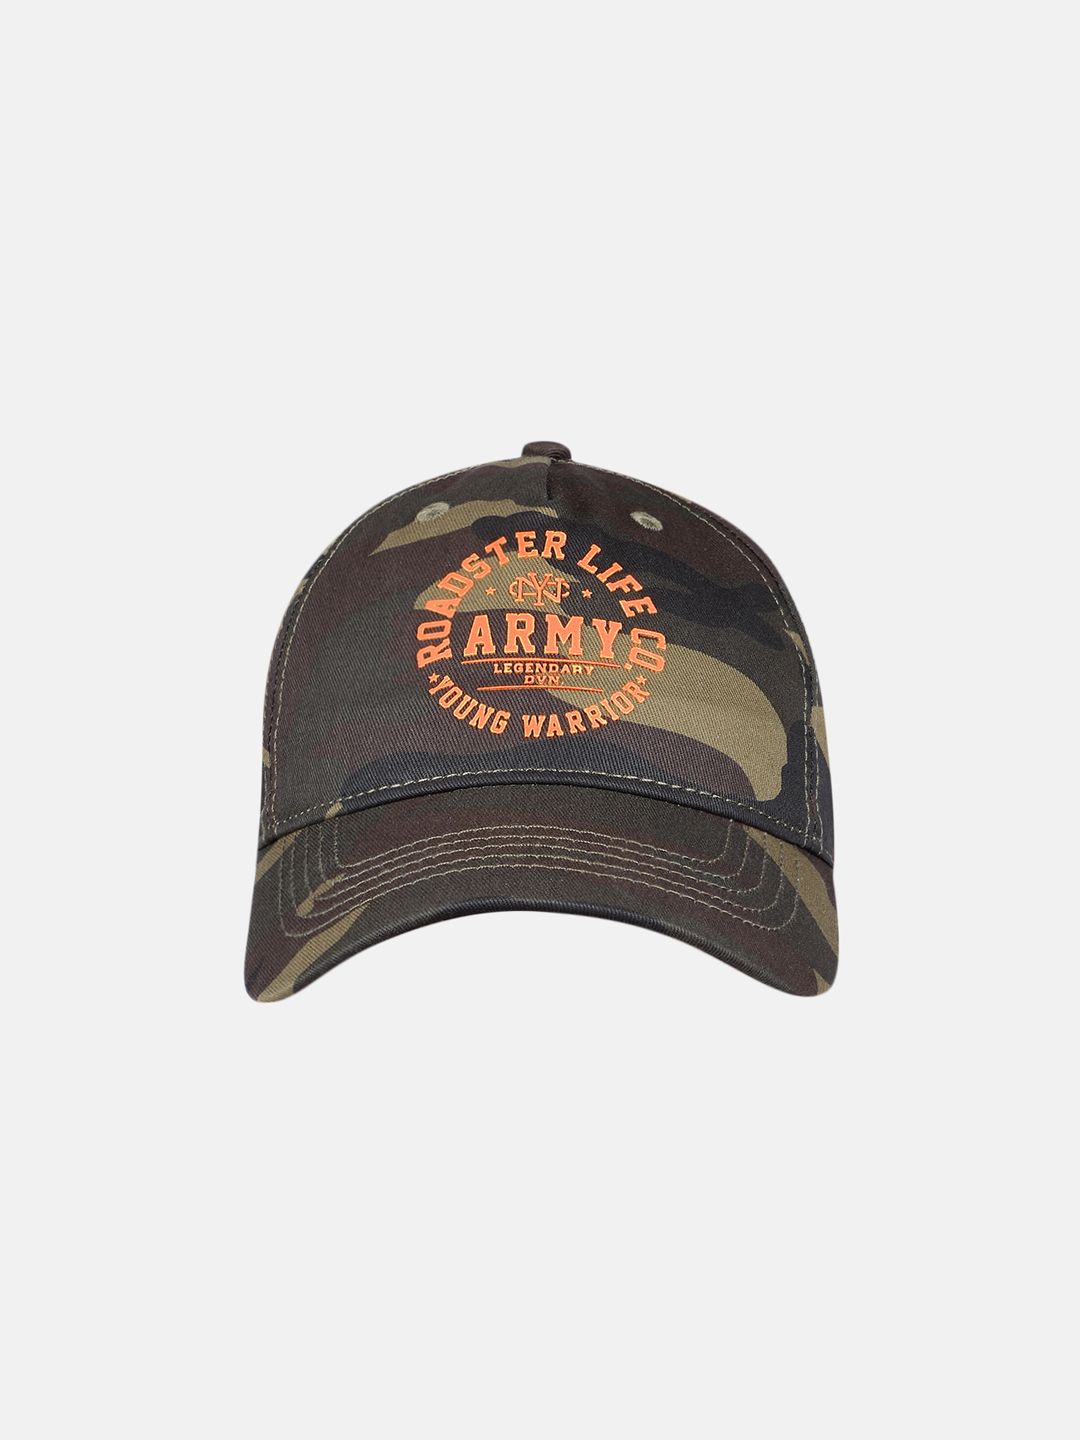 Roadster Unisex Brown & Olive Green Camouflage Printed Baseball Cap Price in India